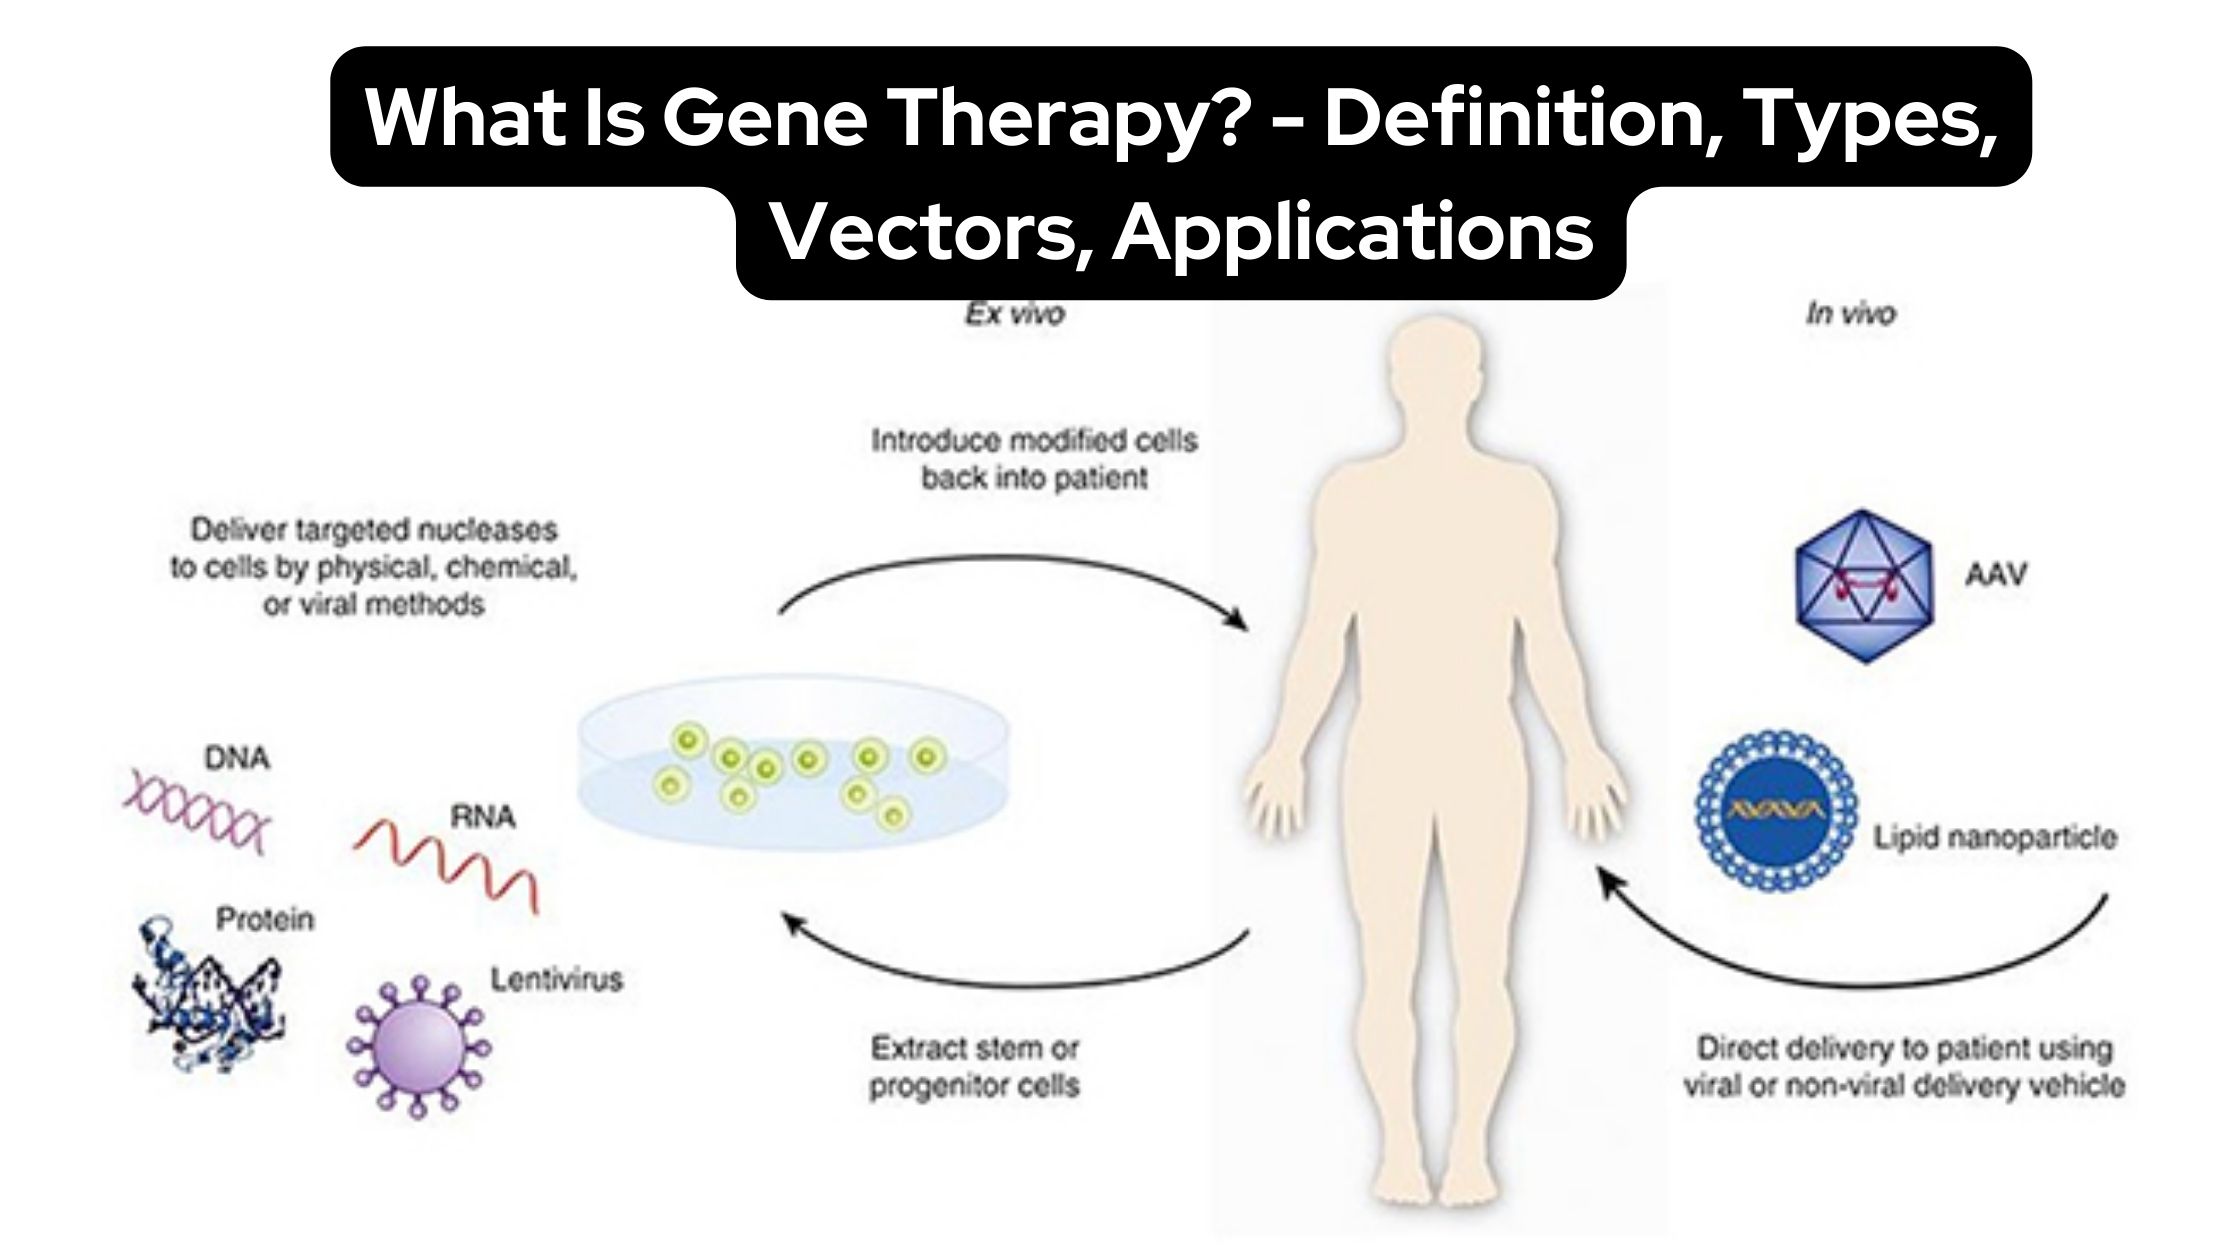 What Is Gene Therapy? - Definition, Types, Vectors, Applications